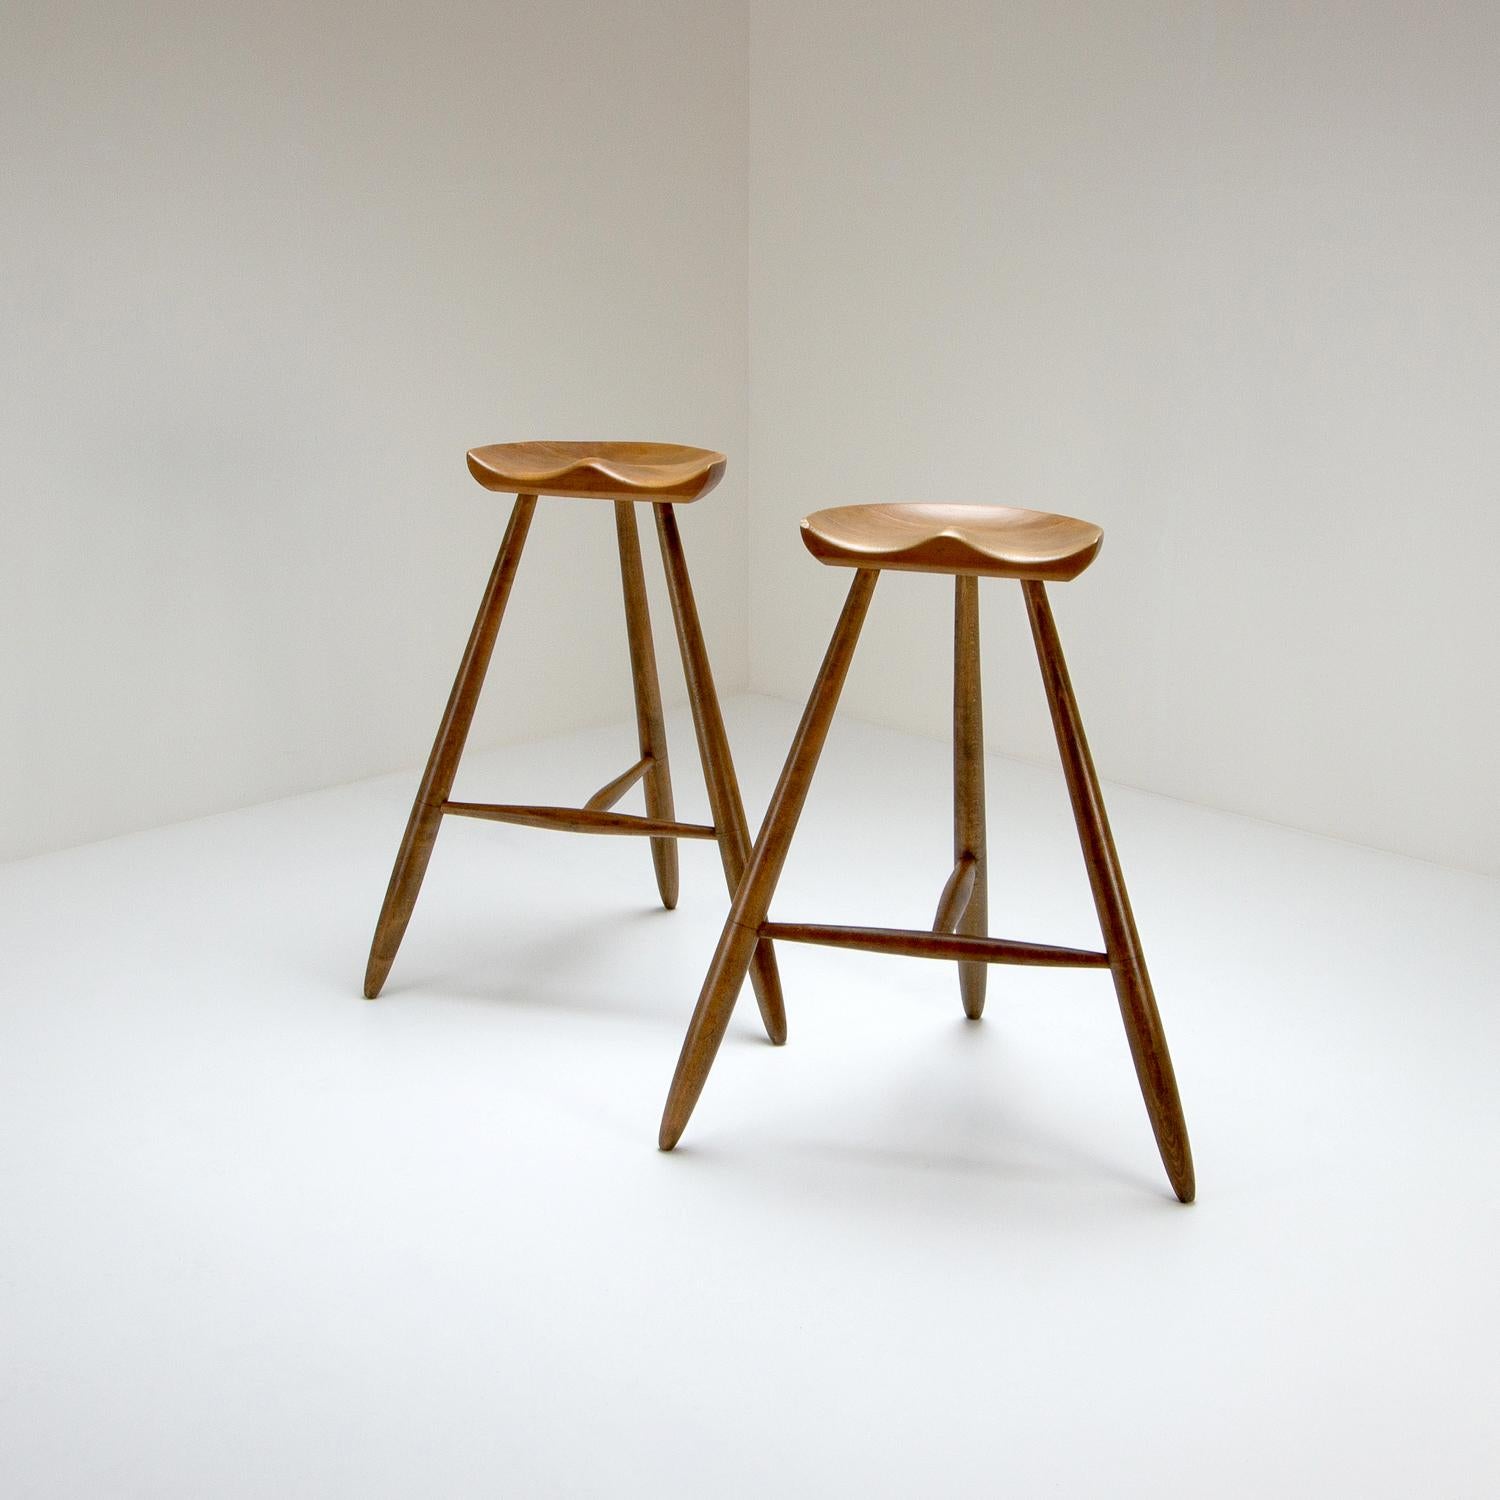 An exceptional pair of very tall functionalist three-legged milking-style stools in beech by Arne Hovmand-Olsen, Denmark, 1940s.